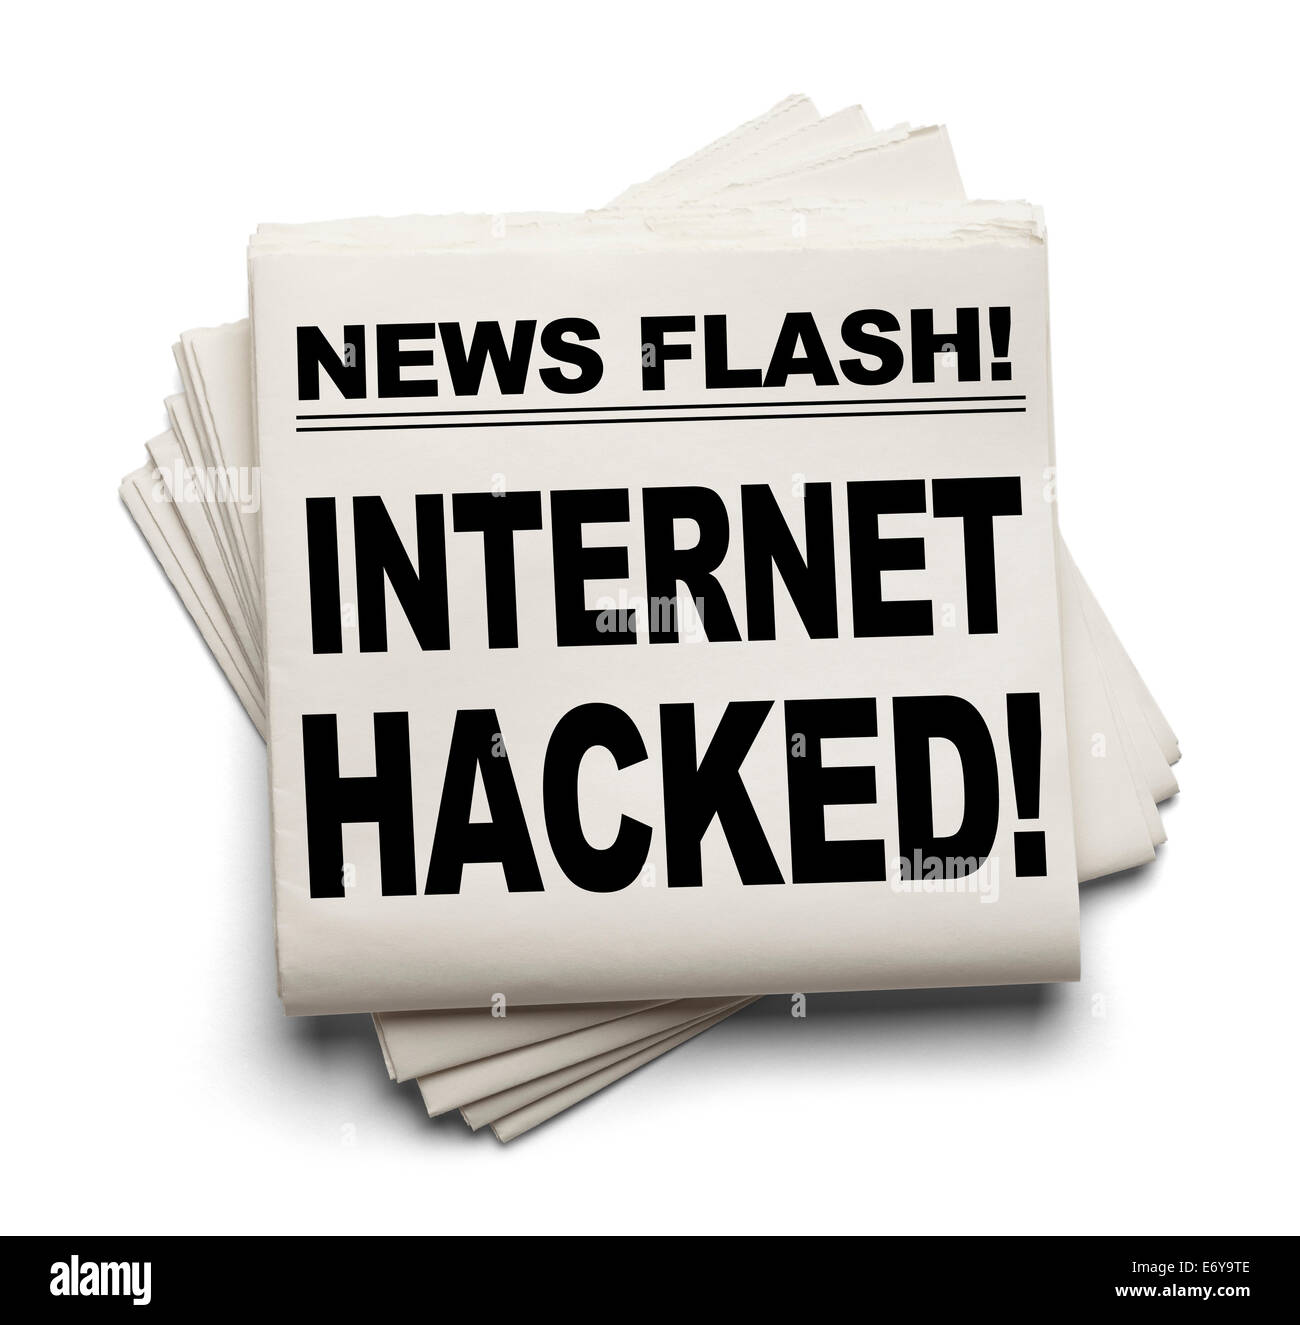 News Flash Internet Hacked News Paper Isolated on White Background. Stock Photo